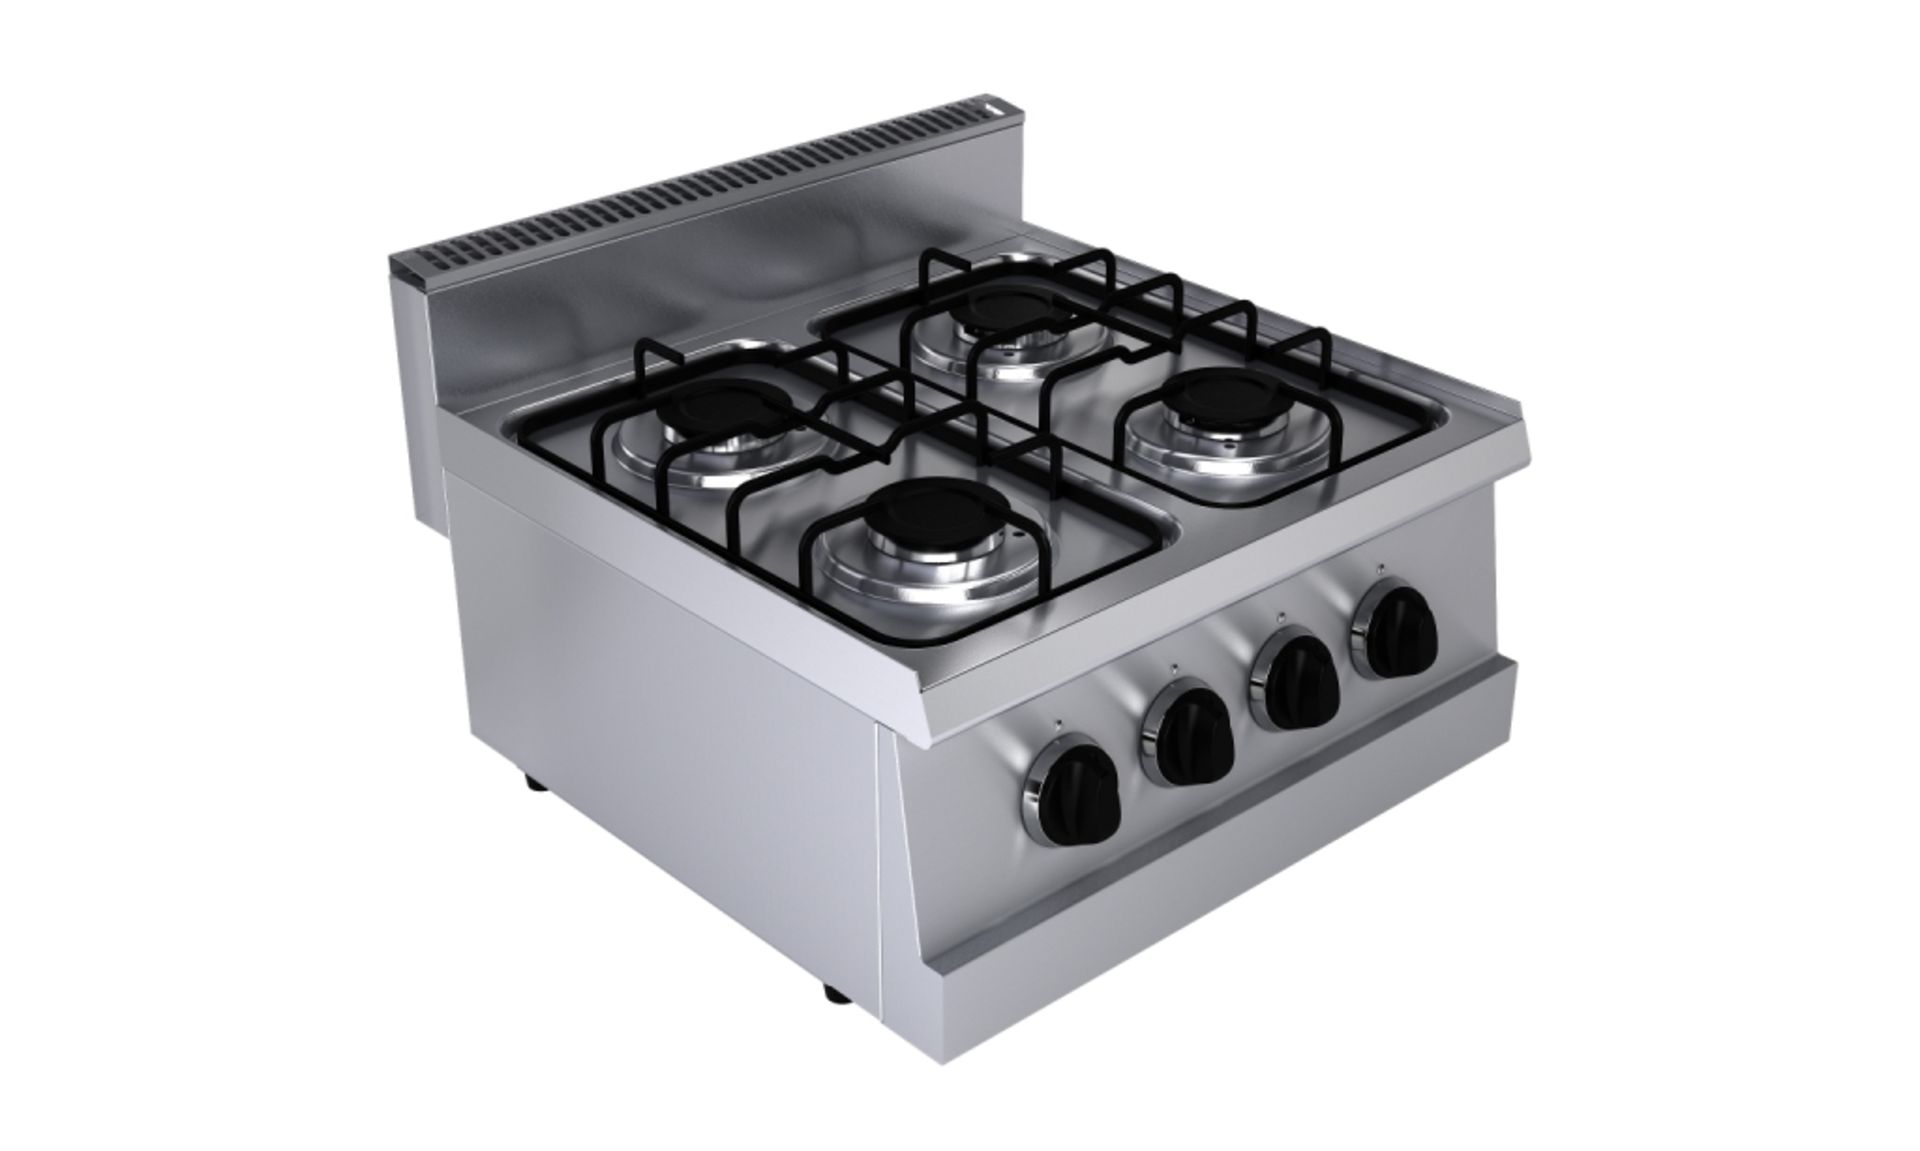 Boiling top with 4 burners - 4 x 3.25 - 600W - GAS - RG6K200G